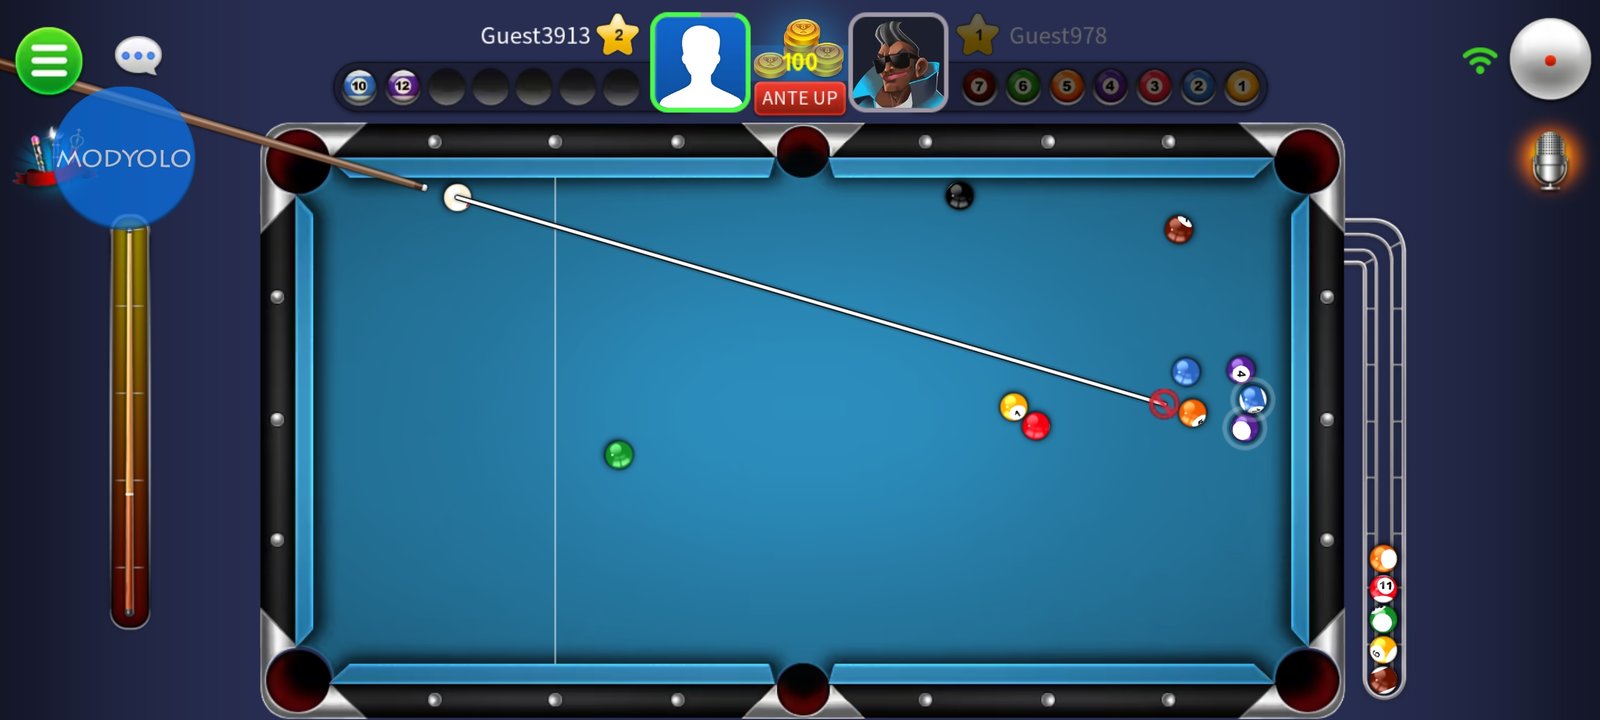 NEW 8 Ball Pool MOD MENU!! LOADED 8 BALL POOL Mod for iOS/Android!! 